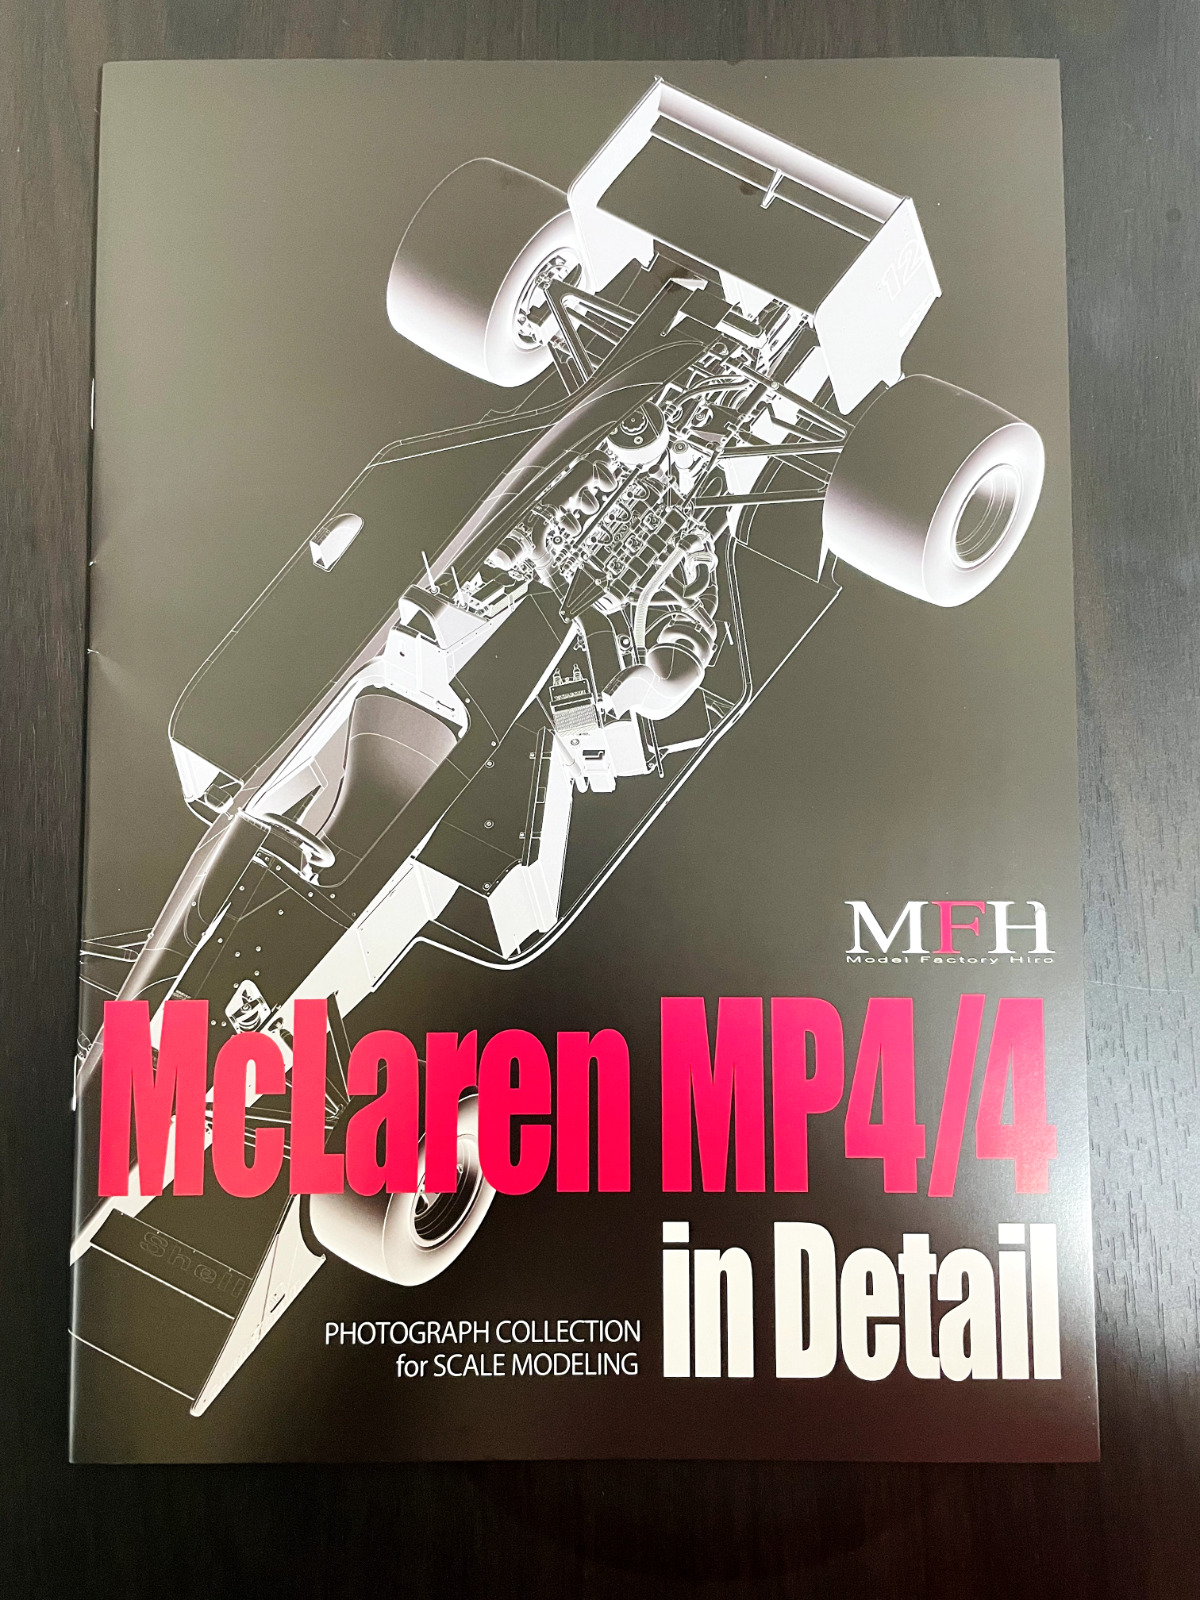 McLaren MP4/4 in Detail PHOTOGRAPH COLLECTION for SCALE MODELING No.1 Art Book